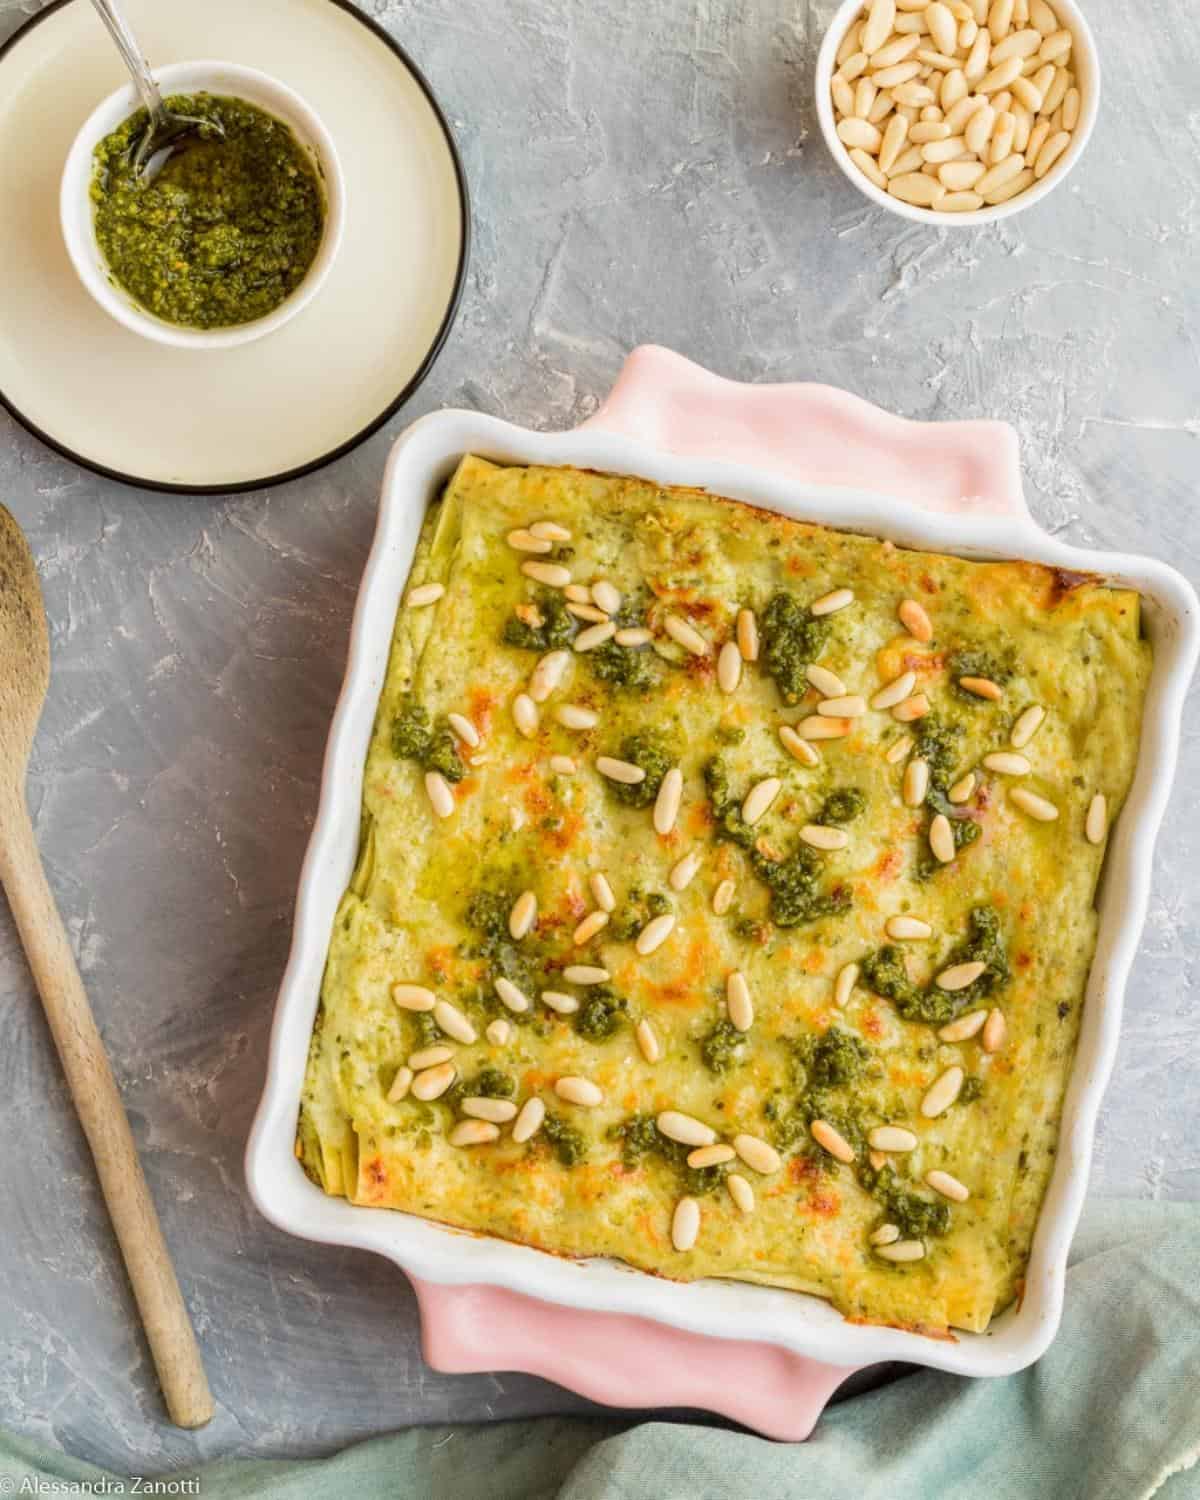 A view from above Pesto Lasagna in a pink pan. It is topped with pesto sauce and pine nuts